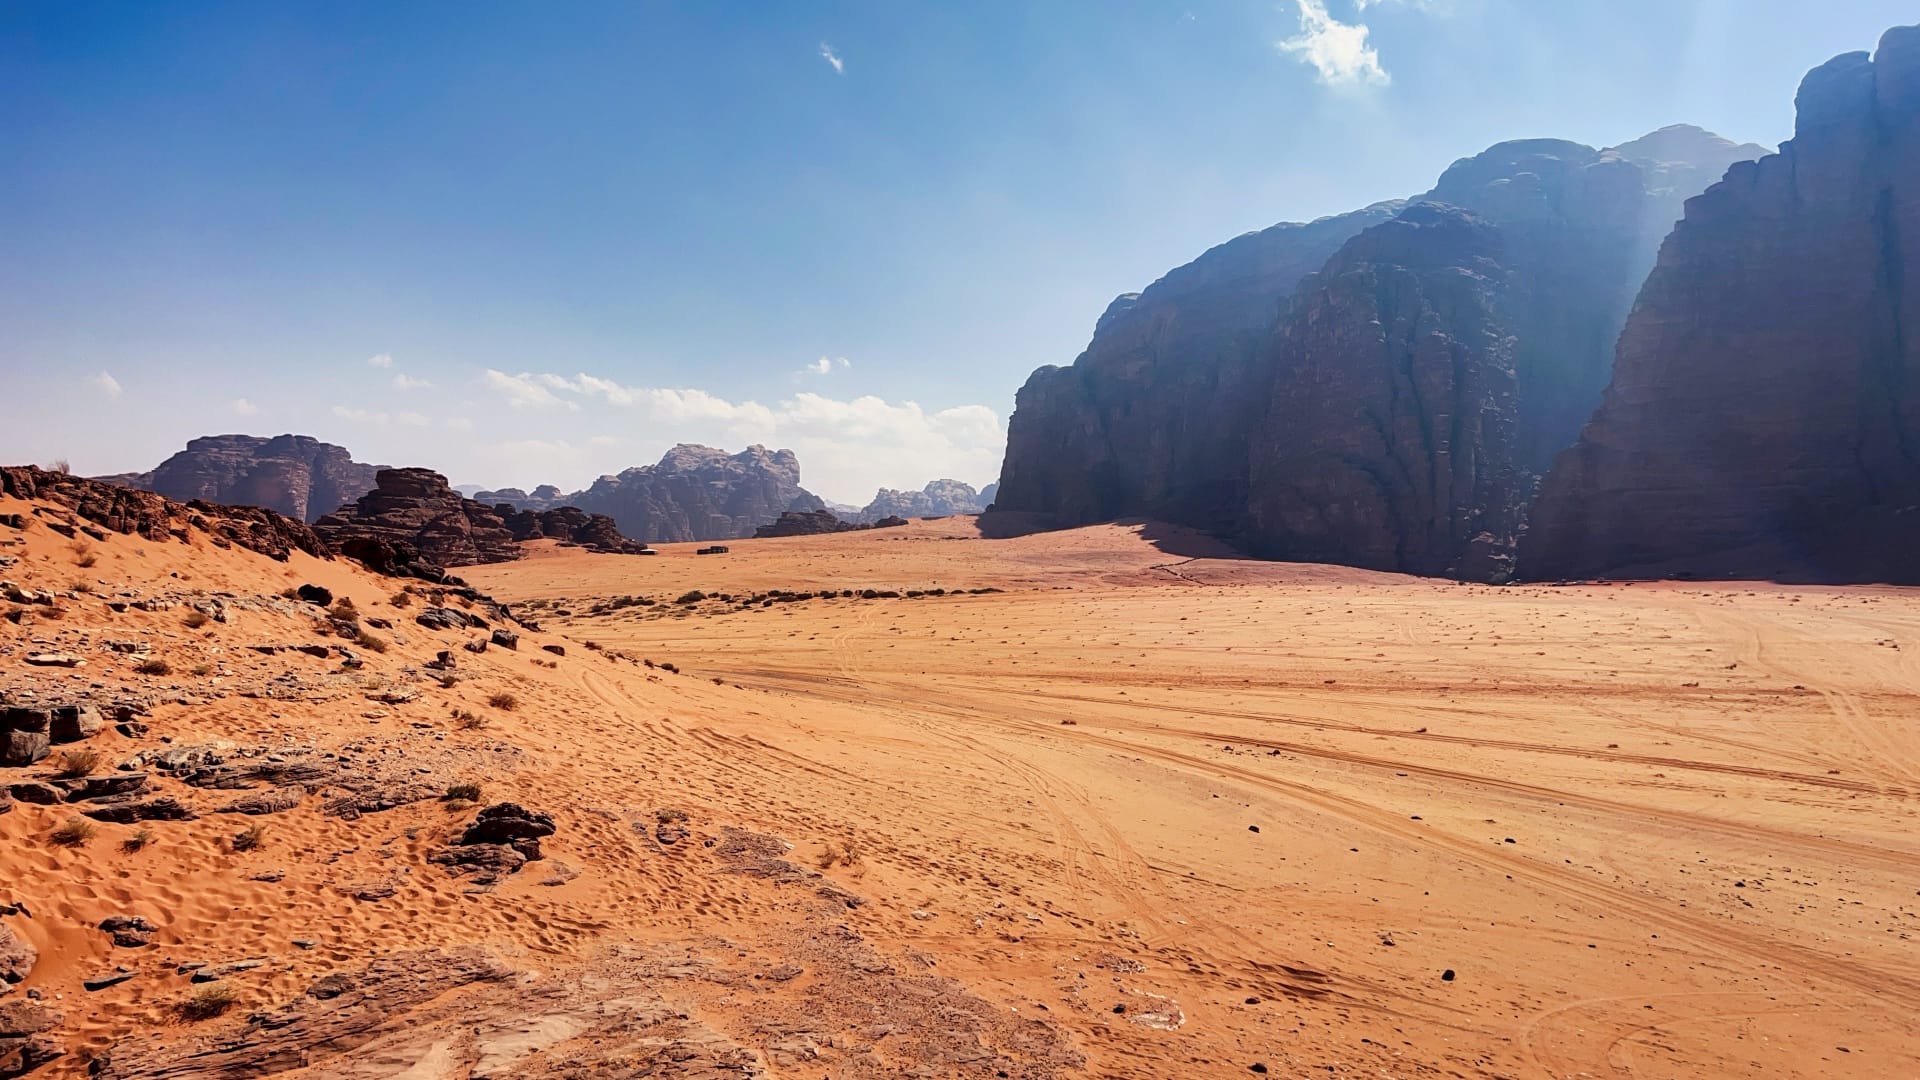 Jordan’s Wadi Rum is like visiting Mars without being the billionaire CEO of a rocket company.